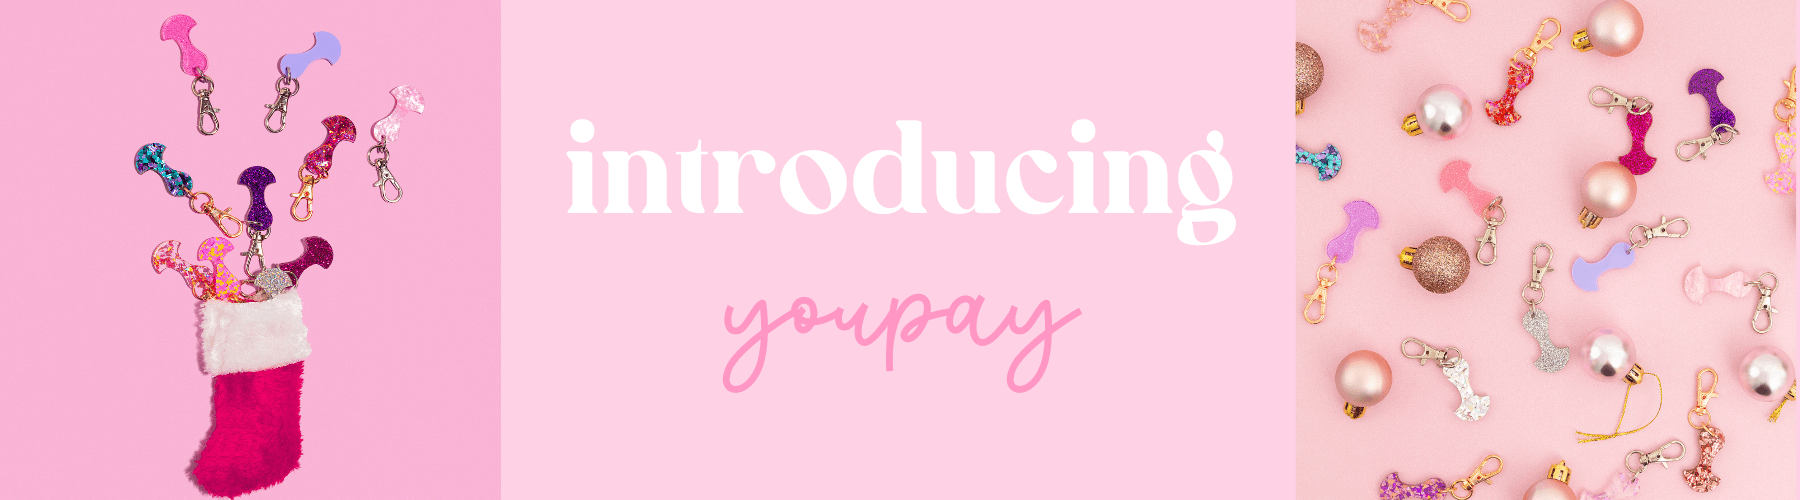 Introducing YOUPAY! - Milkie Co